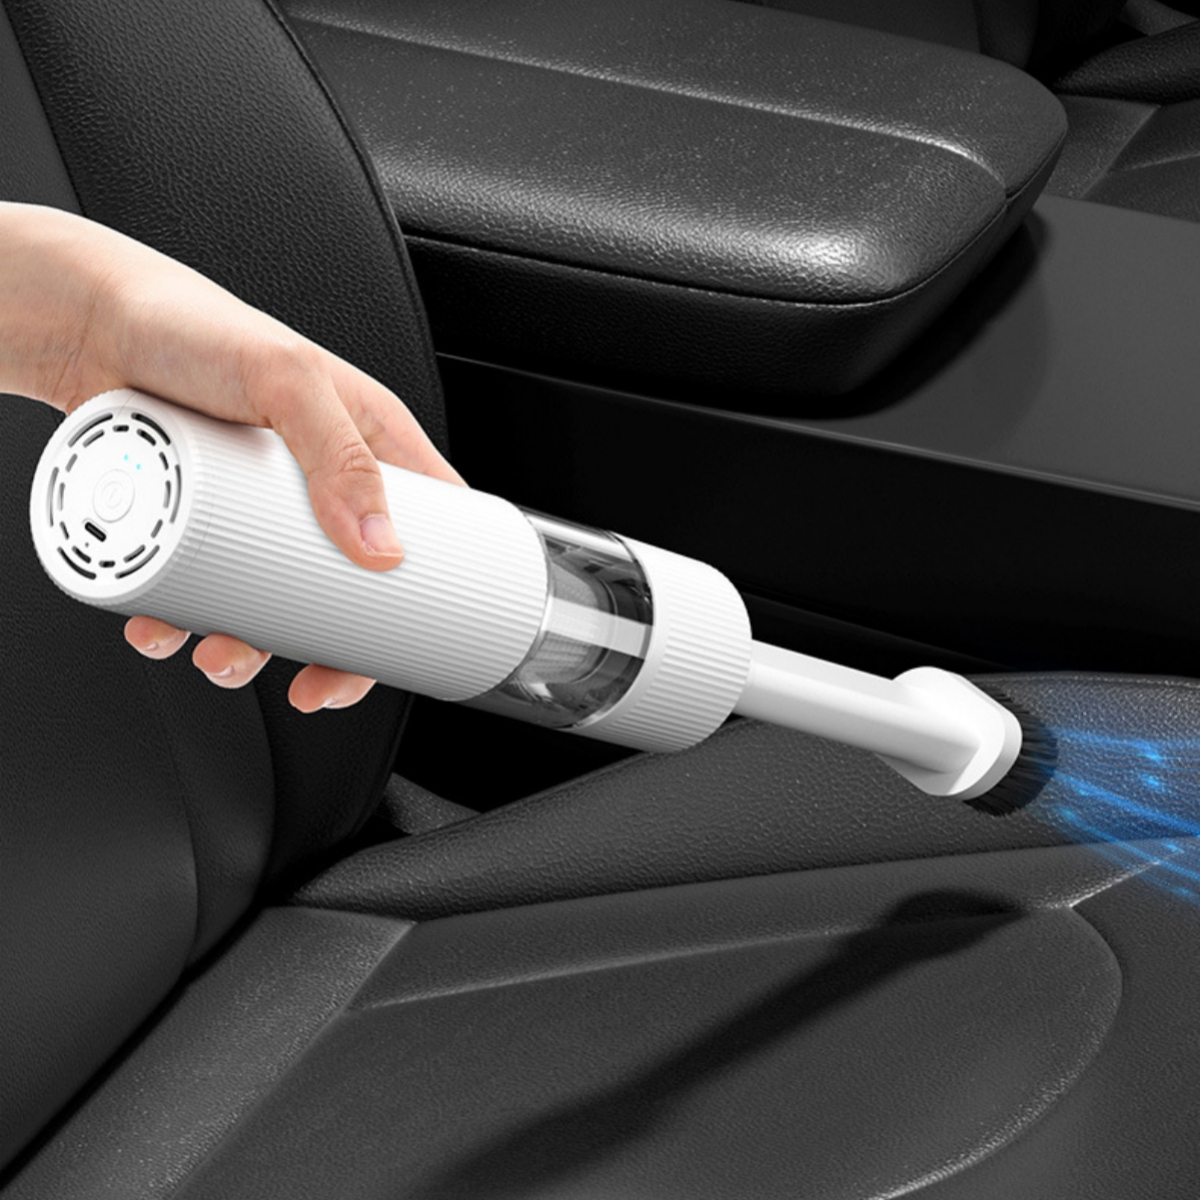 SHAOKE Staubsauger Cleaner Vacuum Handheld Powerful Rechargeable Home by Portable Cordless Powered USB Handstaubsauger,